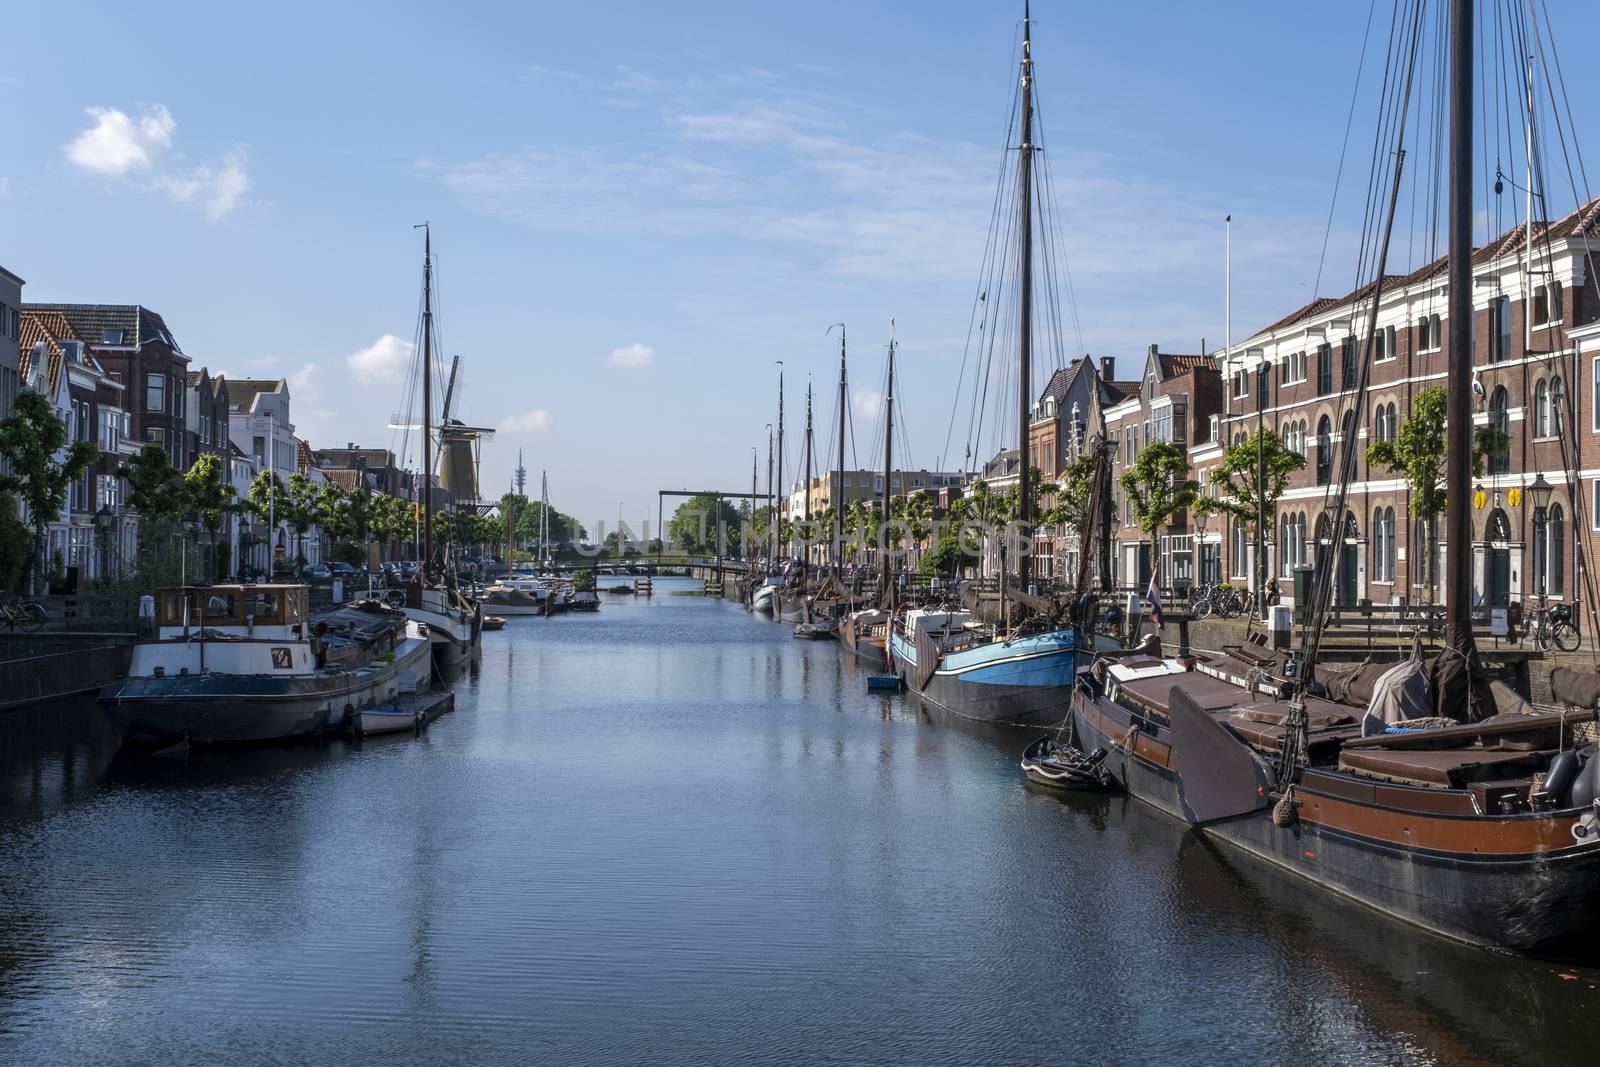 The historic Delfshaven area of Rotterdam, The Netherlands.